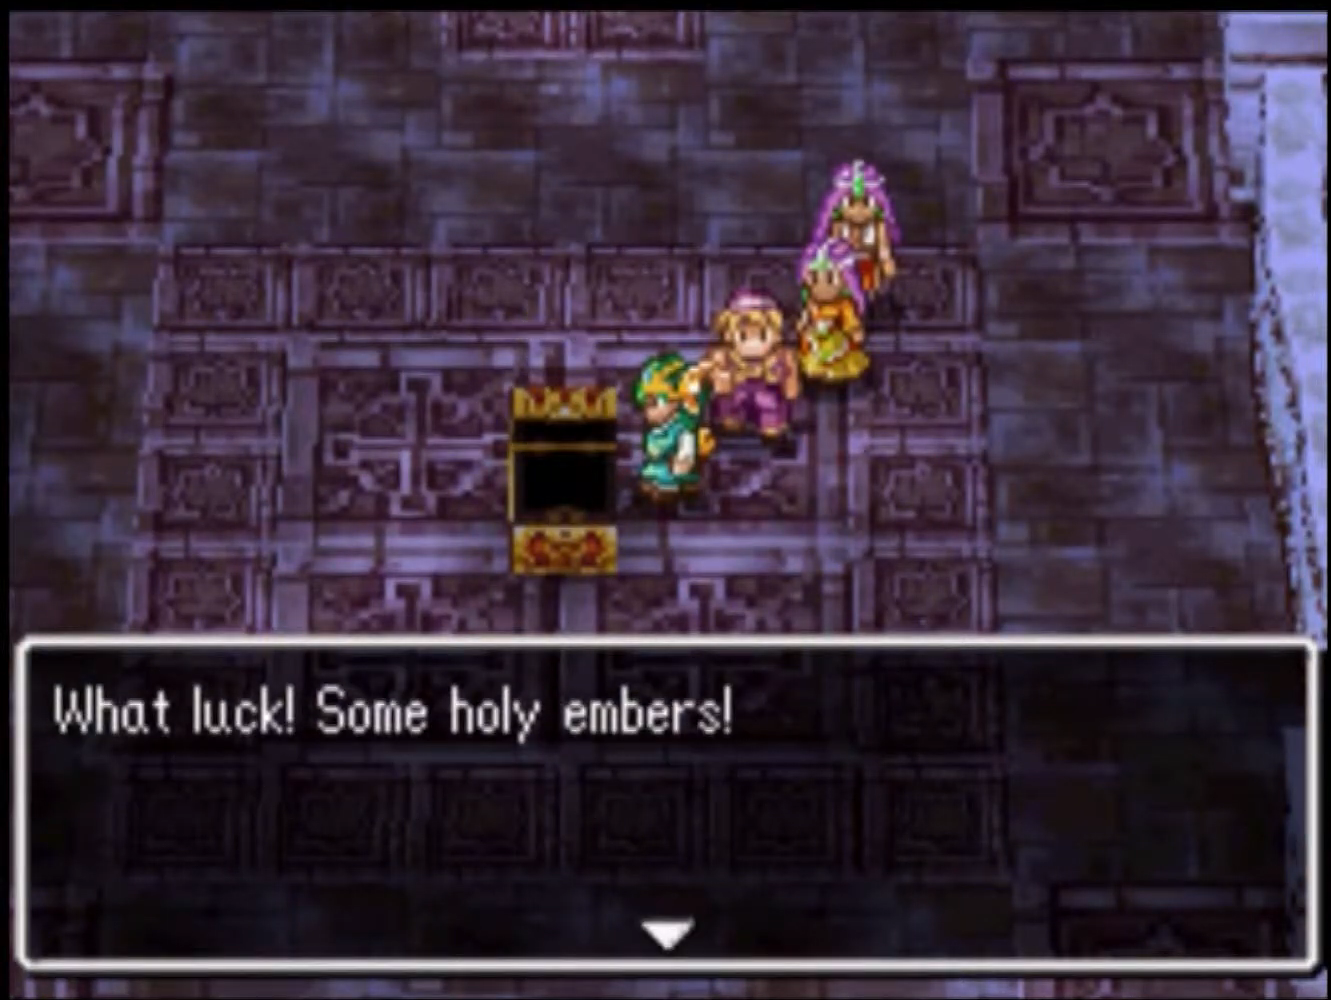 Get the holy embers on this floor and then go up (1) | Dragon Quest IV